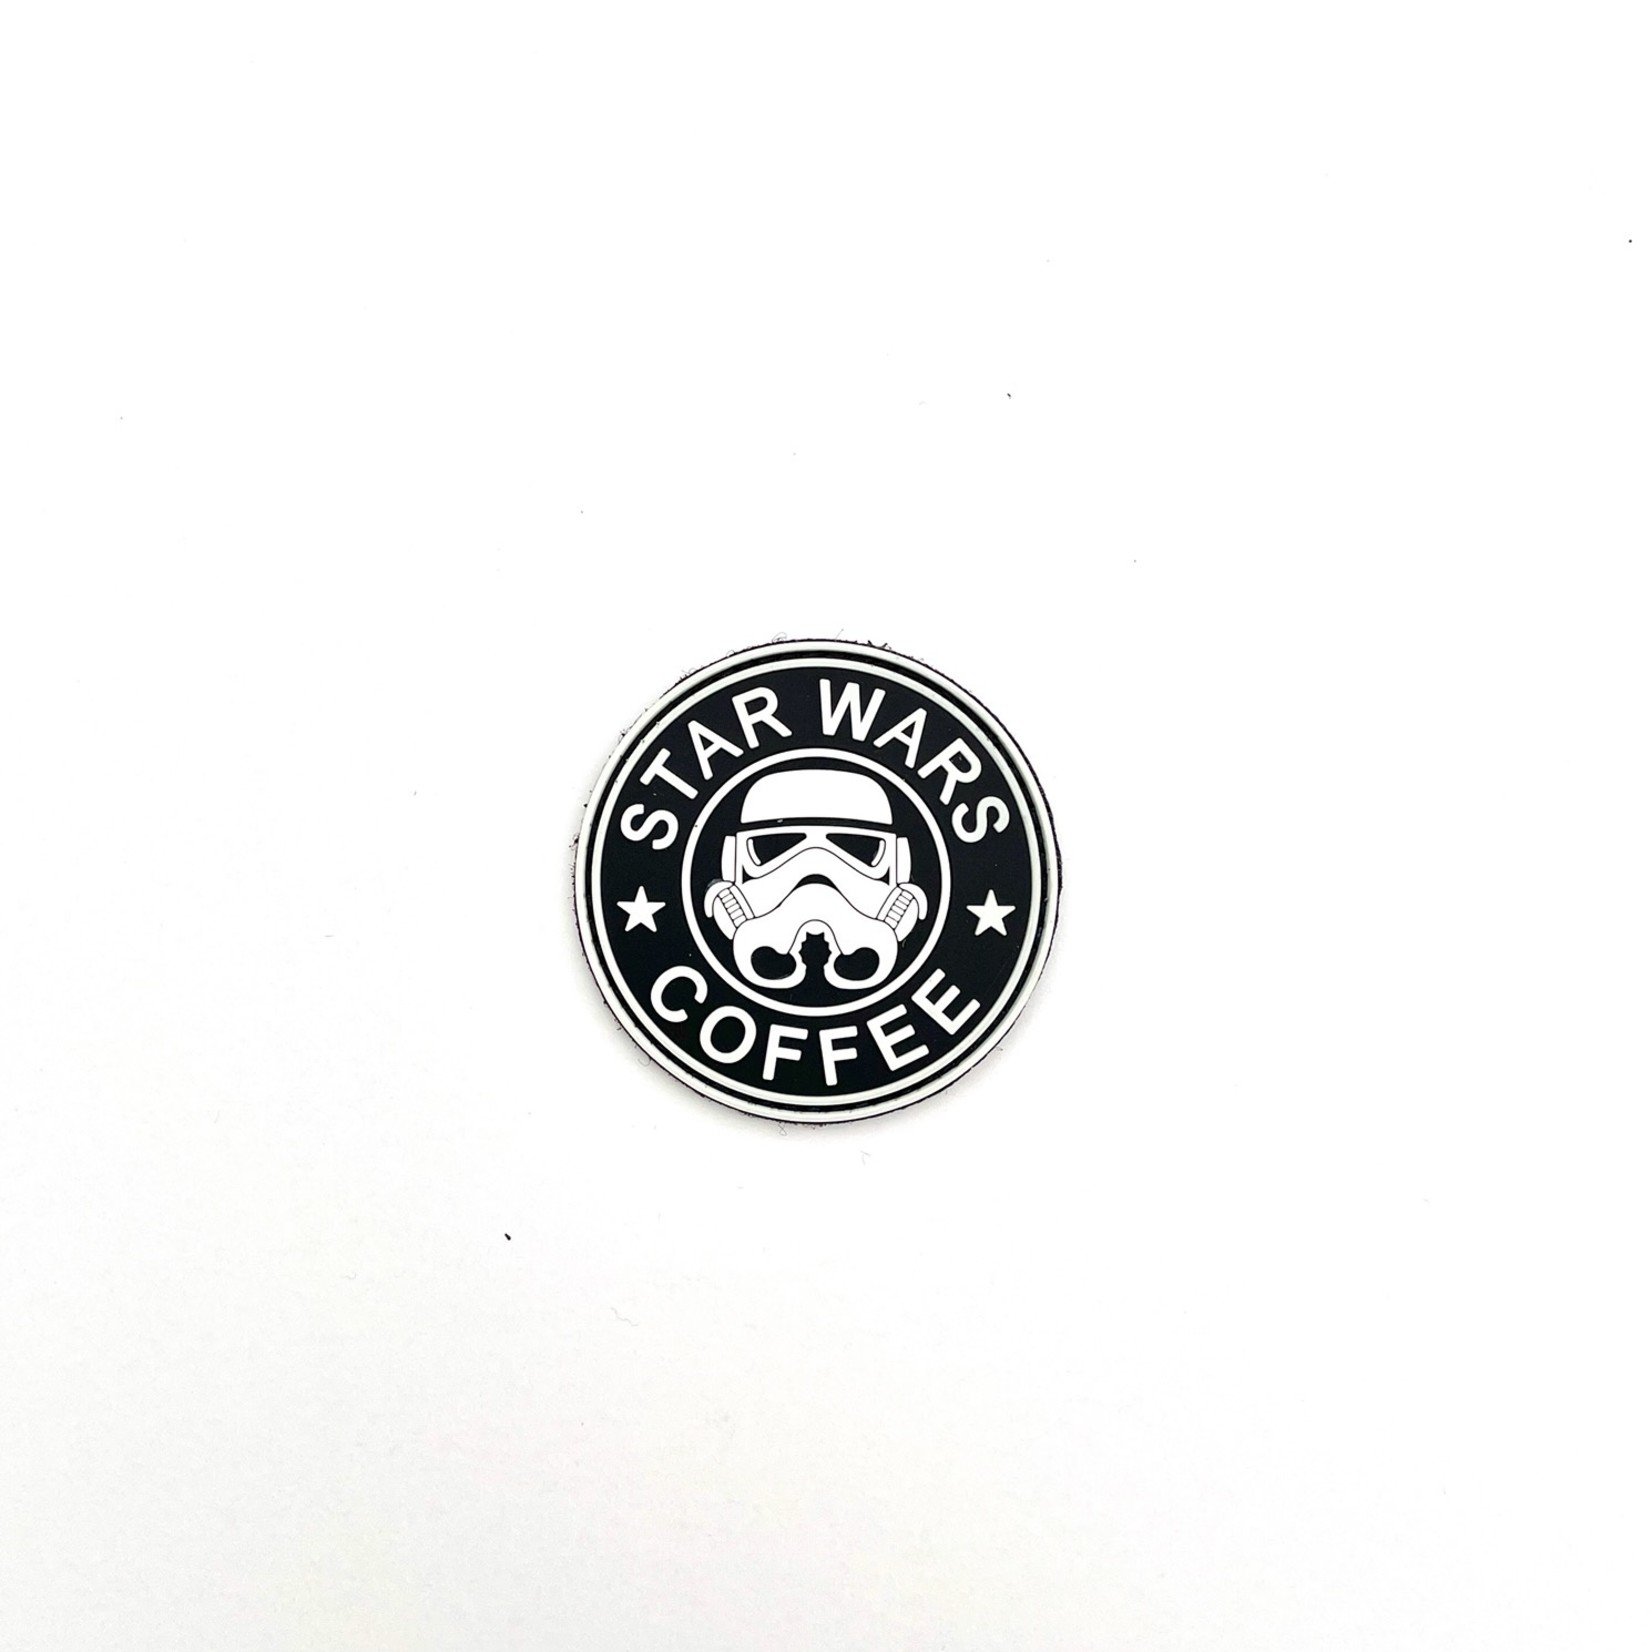 TACTICAL INNOVATIONS TIC Patch - STARWARS COFFEE